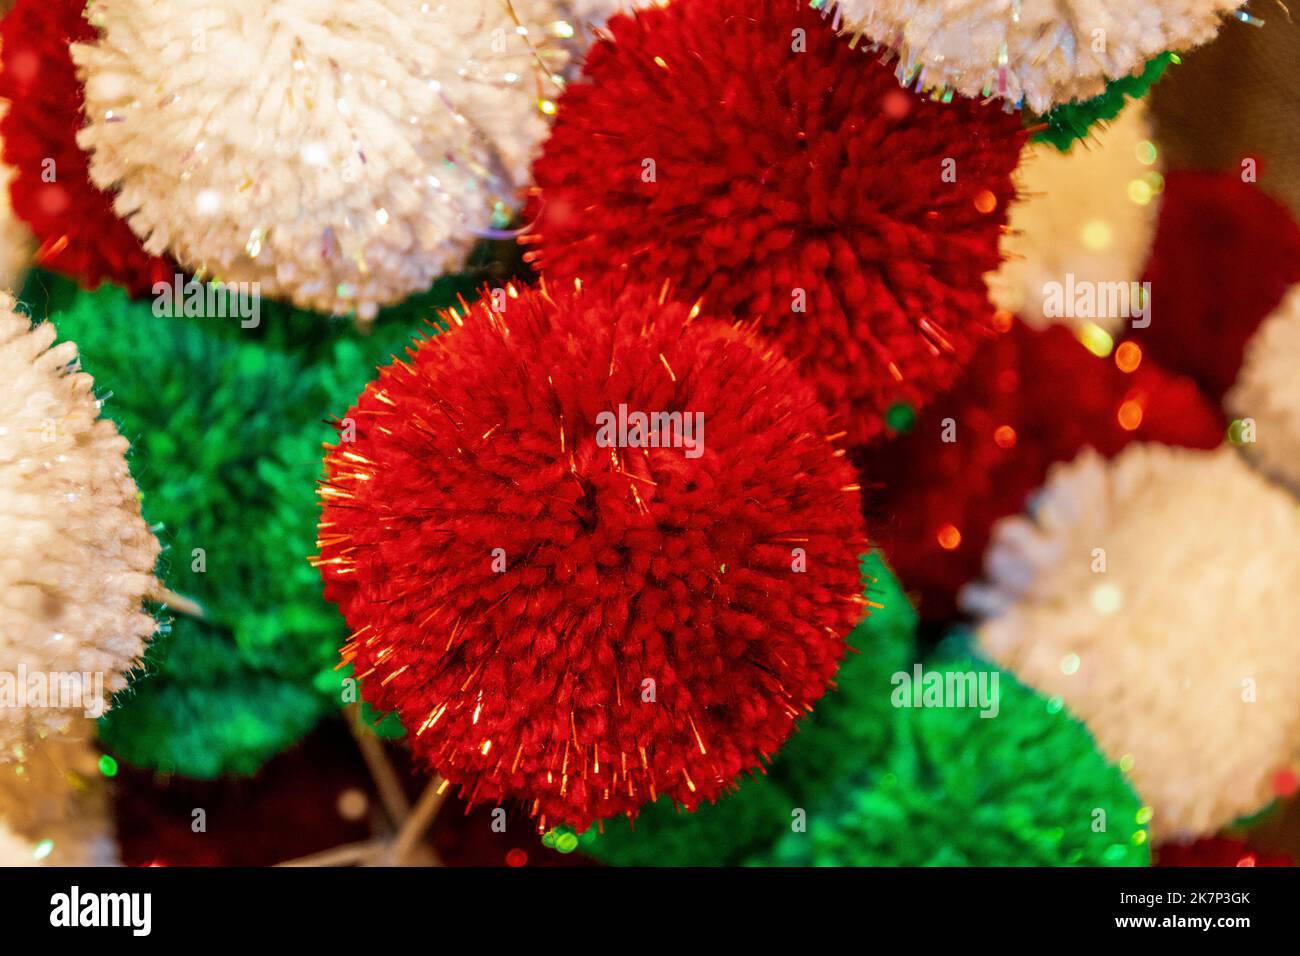 Pretty Festive Christmas Holiday background of Red Green and White sparkly pompom balls - some in focus and some blurred and boke Stock Photo